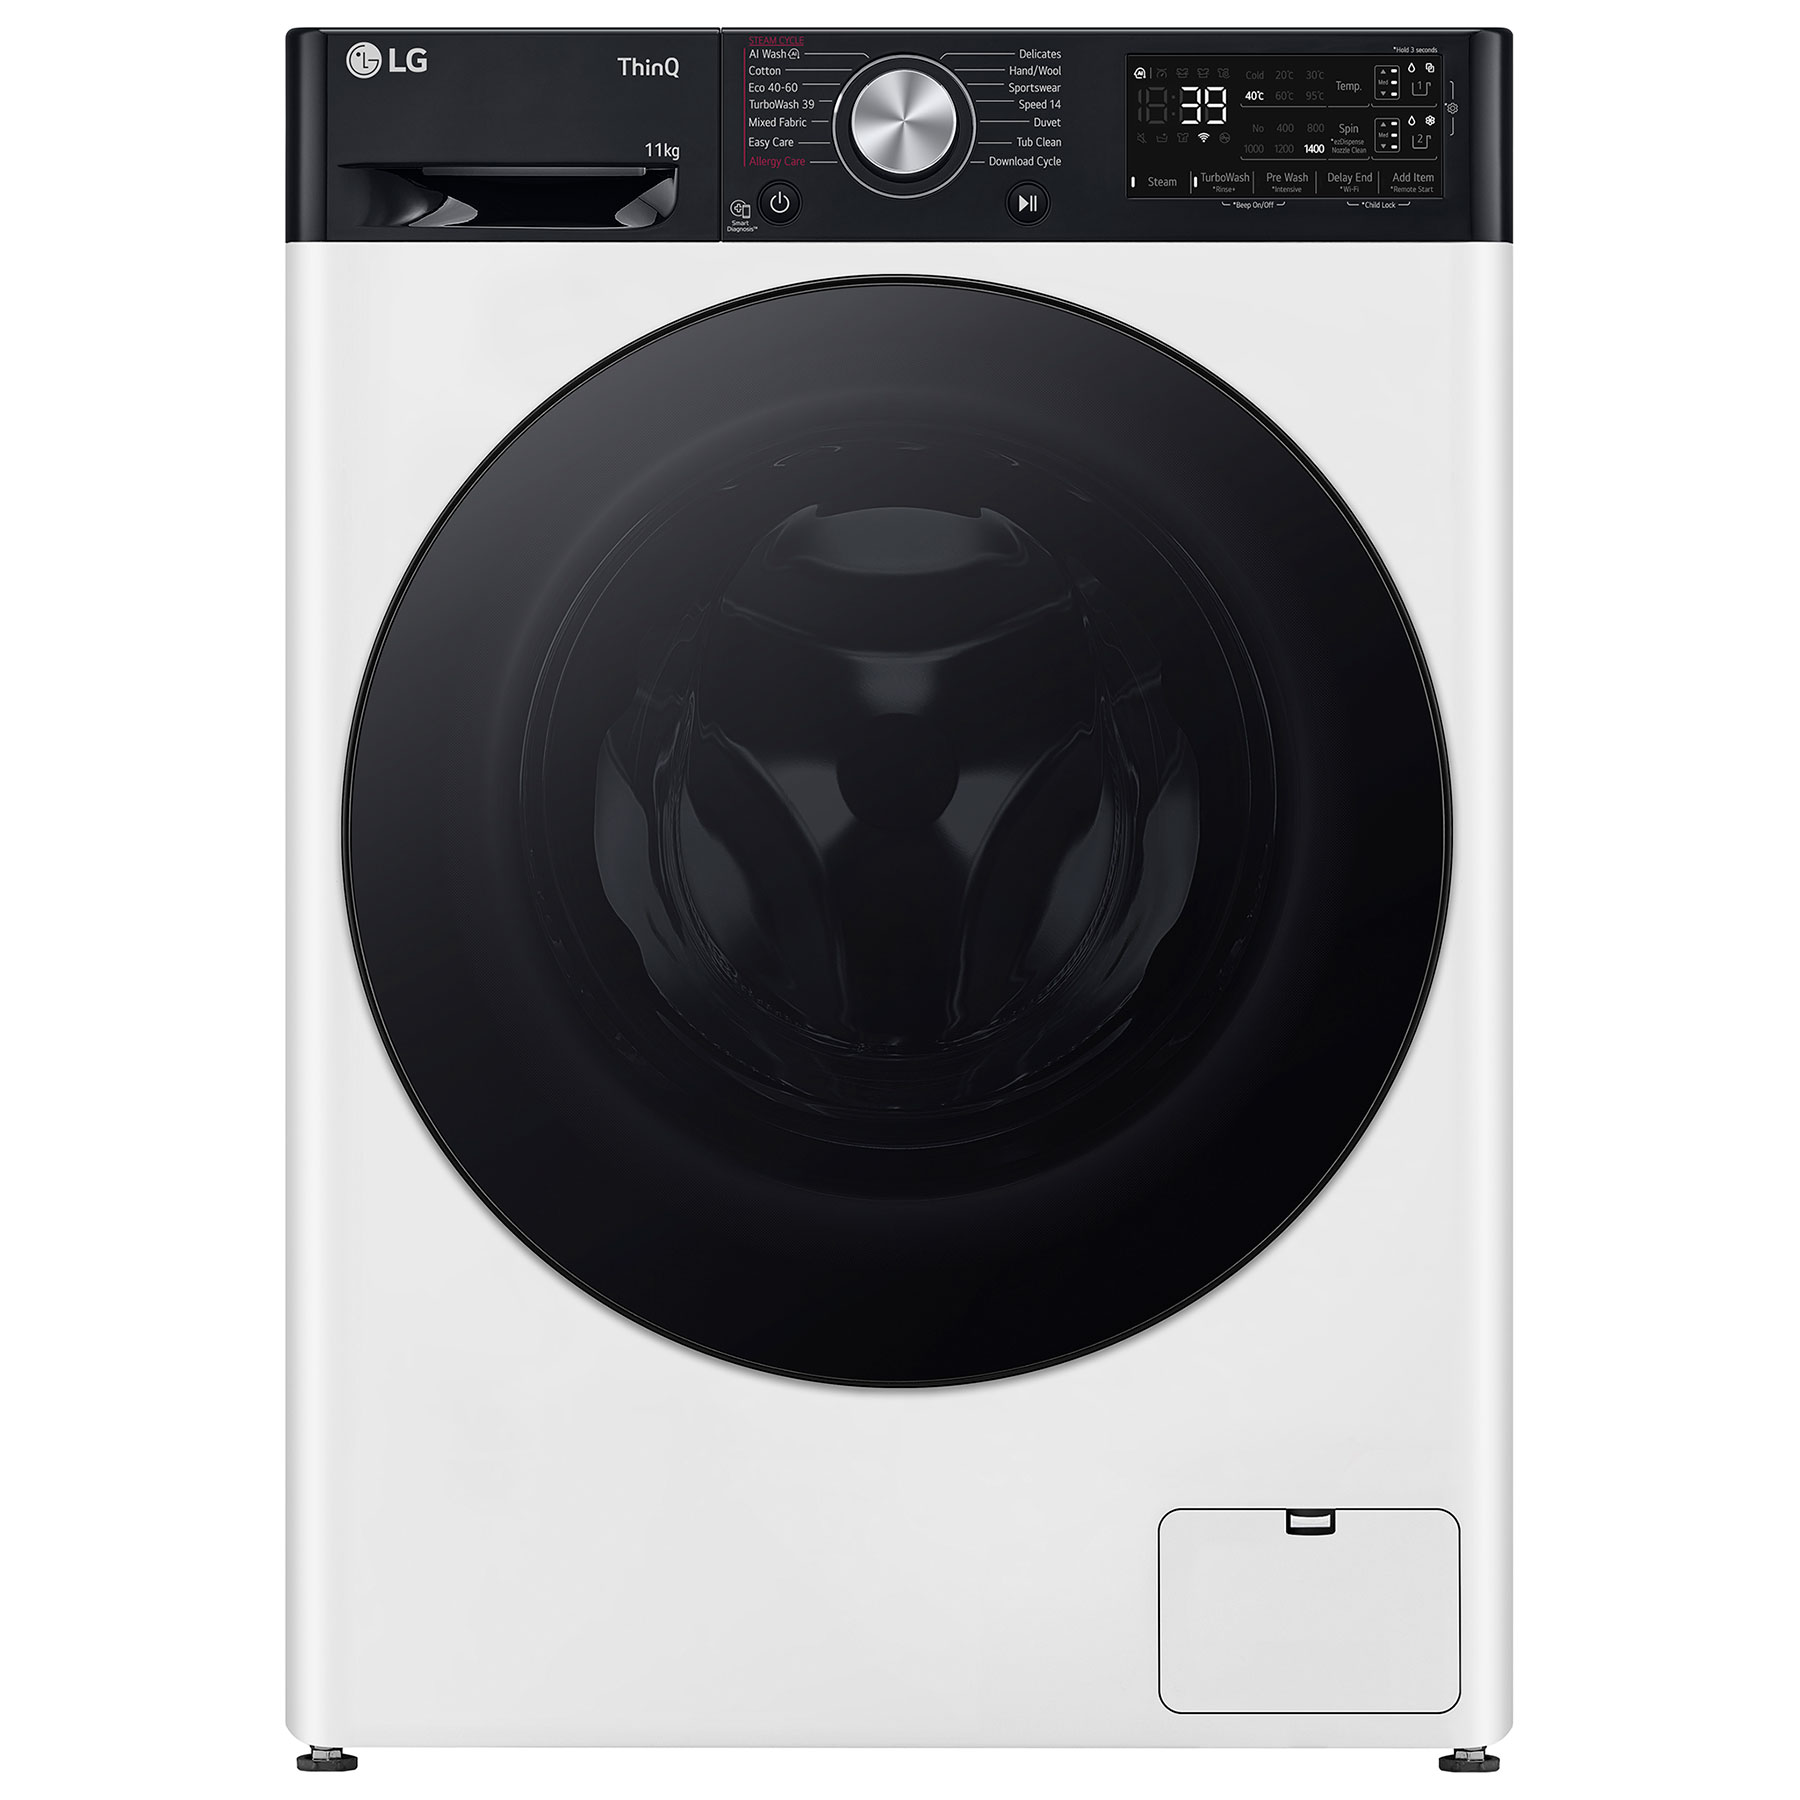 Image of LG F4Y711WBTA1 Washing Machine in White 1400rpm 11kg A Rated Wi Fi